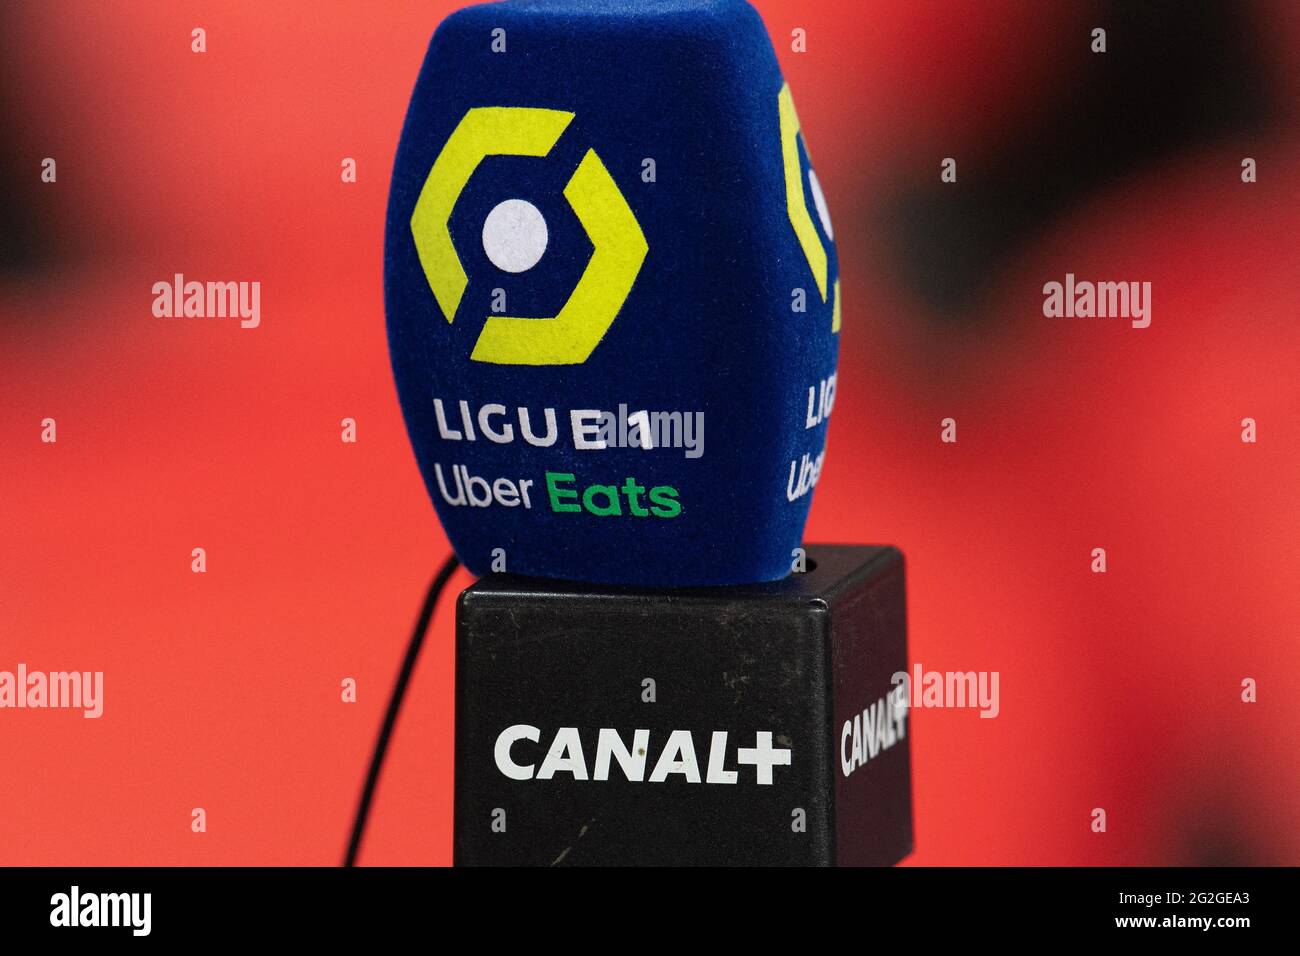 Ligue 2 High Resolution Stock Photography and Images - Alamy